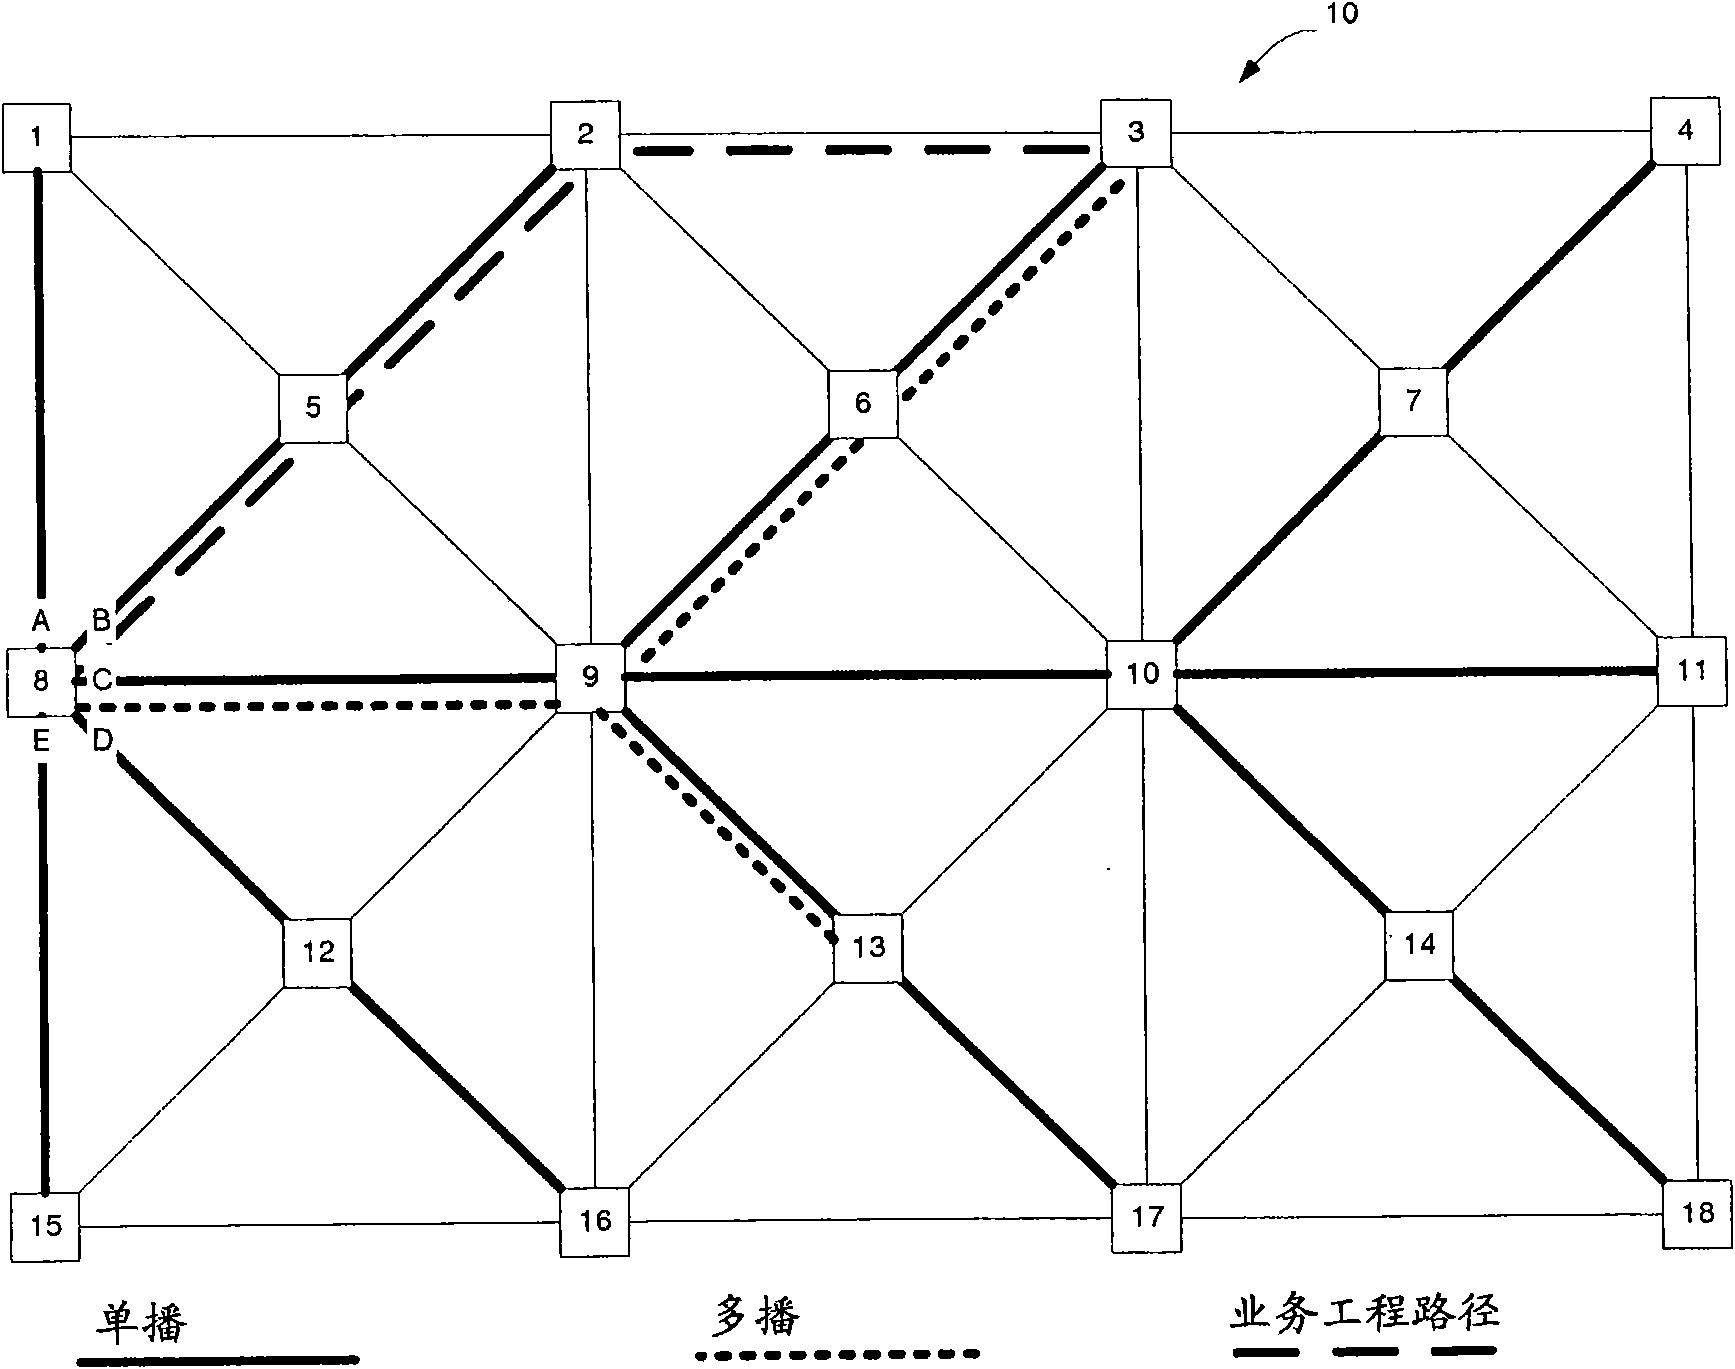 Traffic engineered paths in a link state protocol controlled Ethernet network